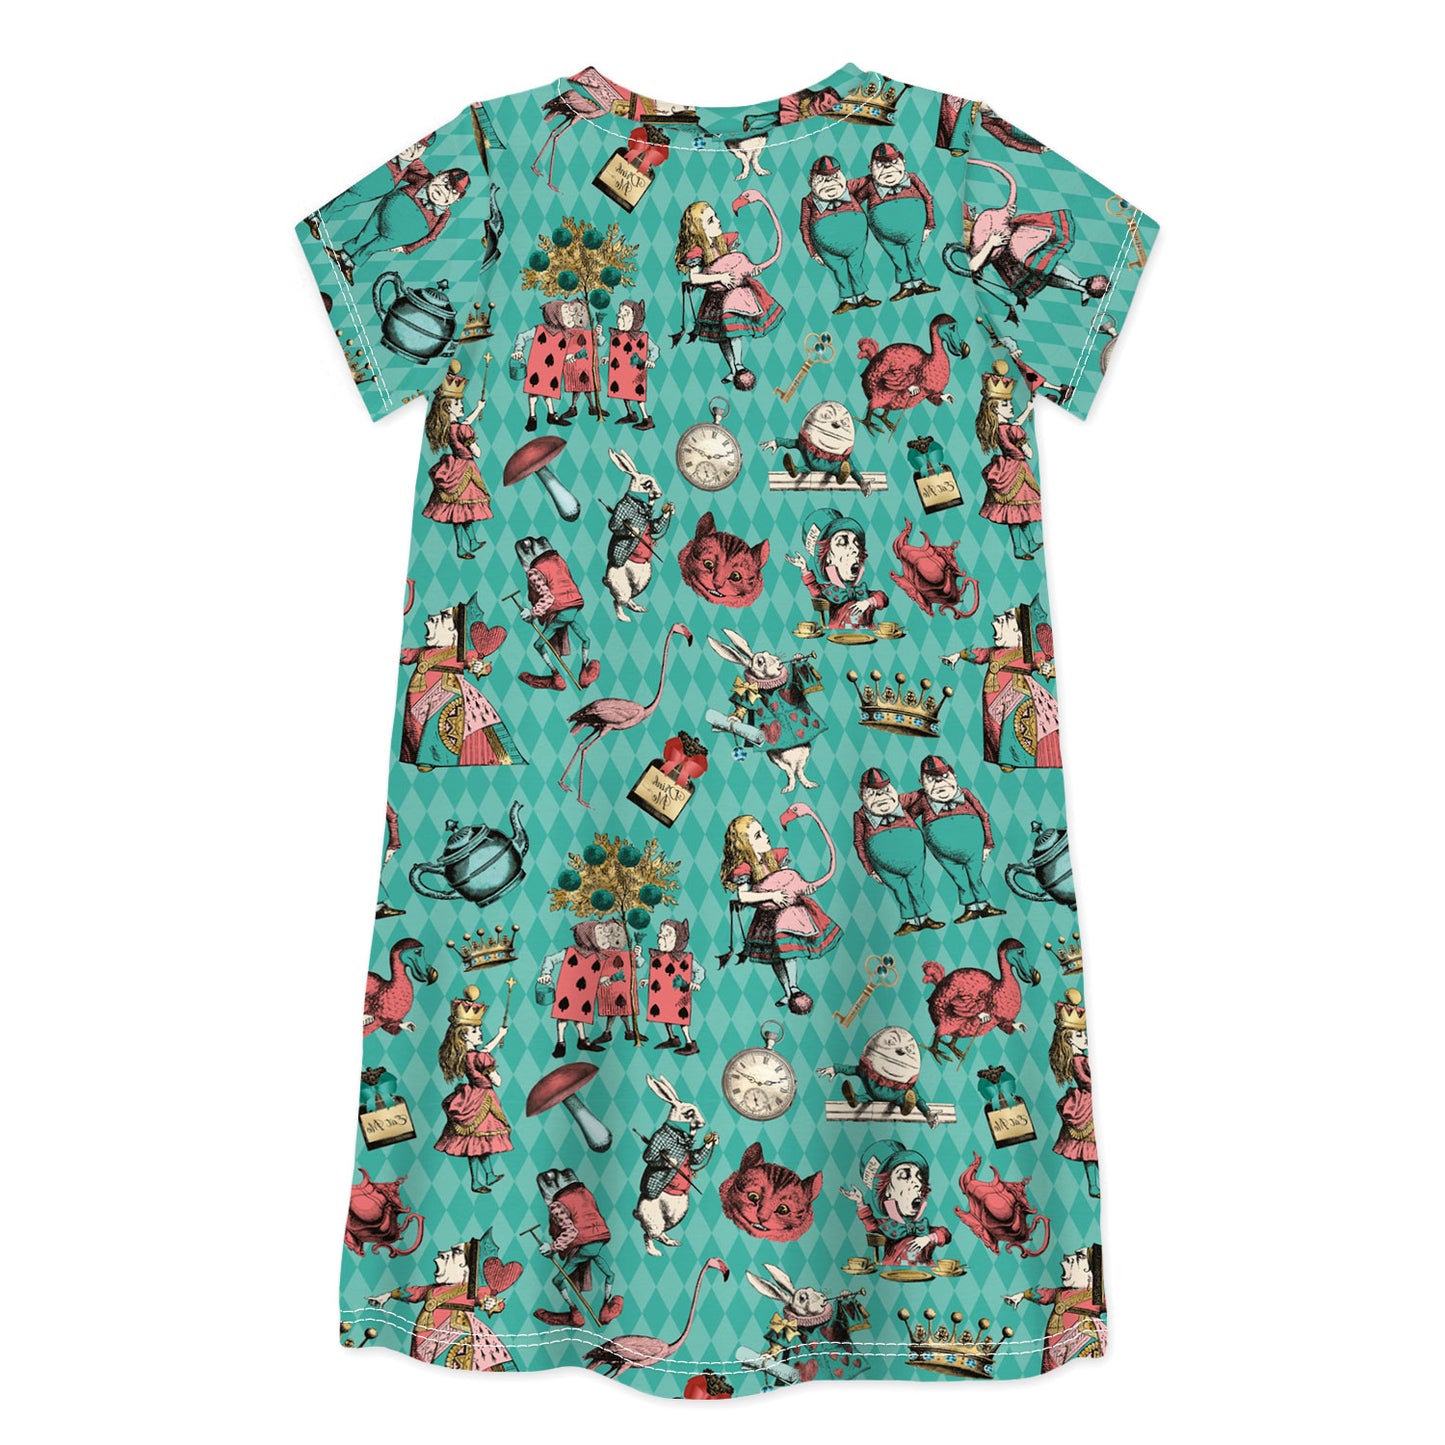 Short Sleeve Dress WHO.ARE.YOU?